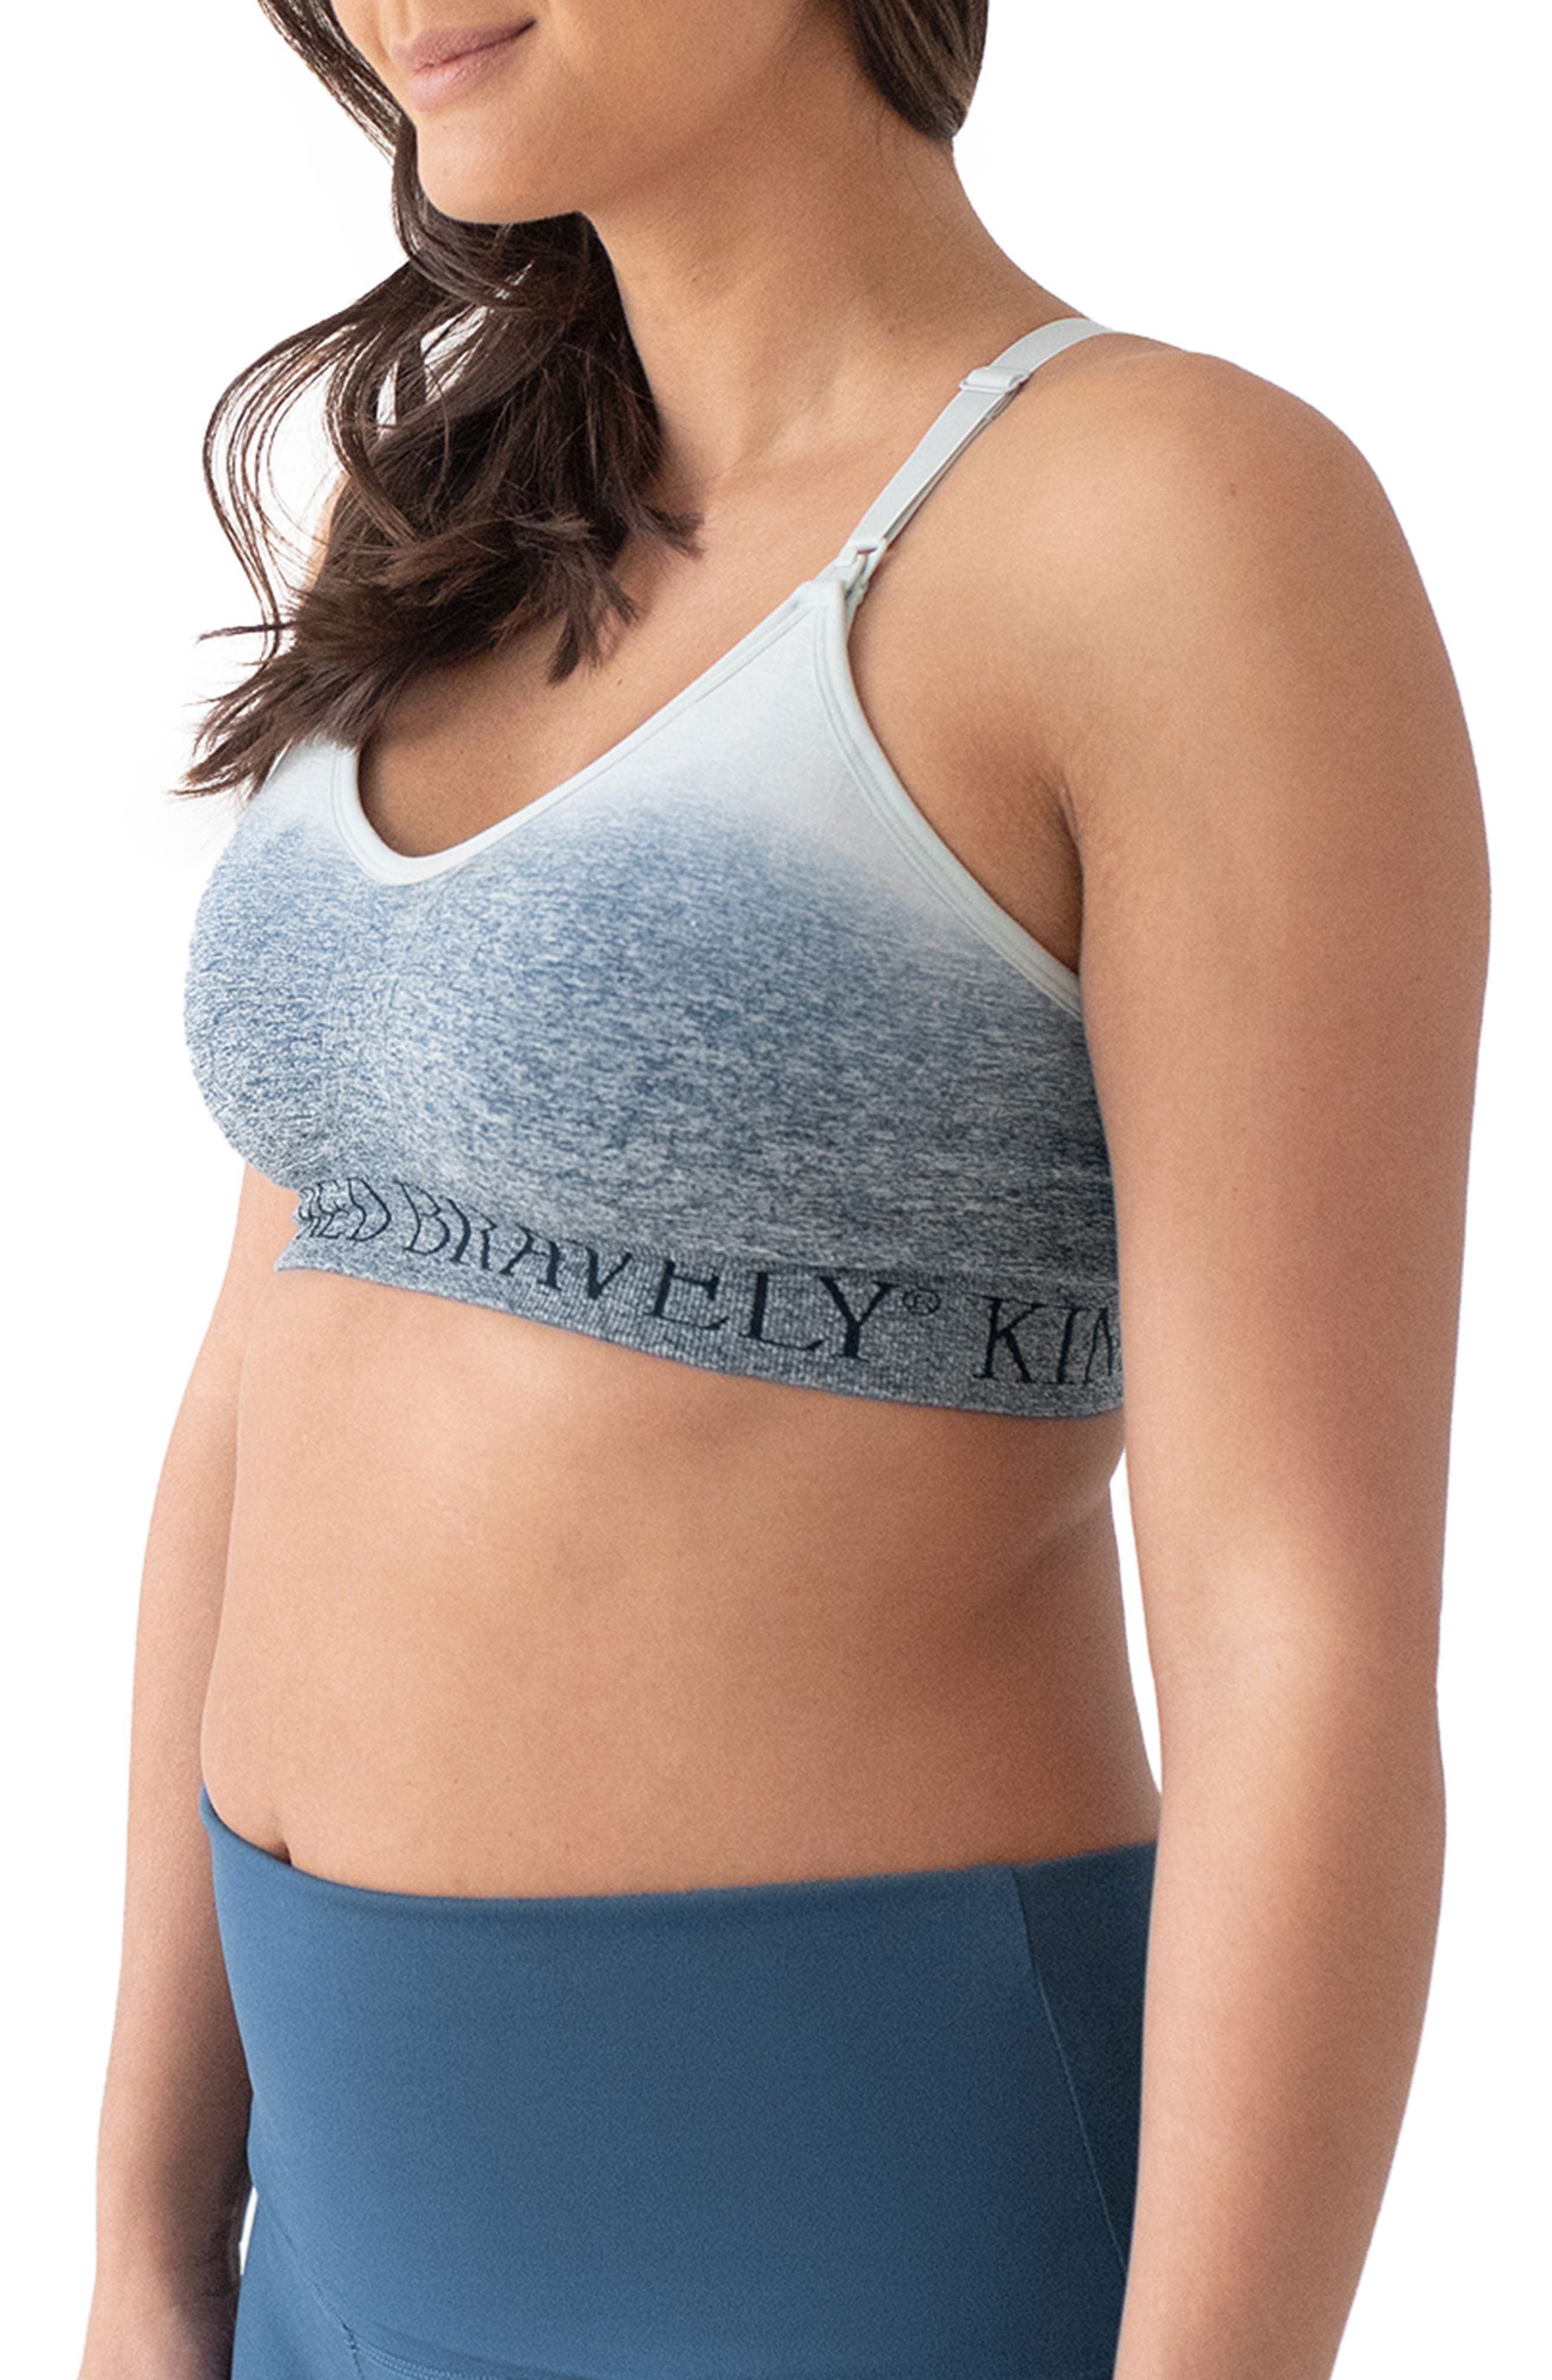 Kindred Bravely Plus Size Busty Sublime Hands-Free Pumping & Nursing Sports  Bra s - Fits s 42E-46I - Ombre Purple